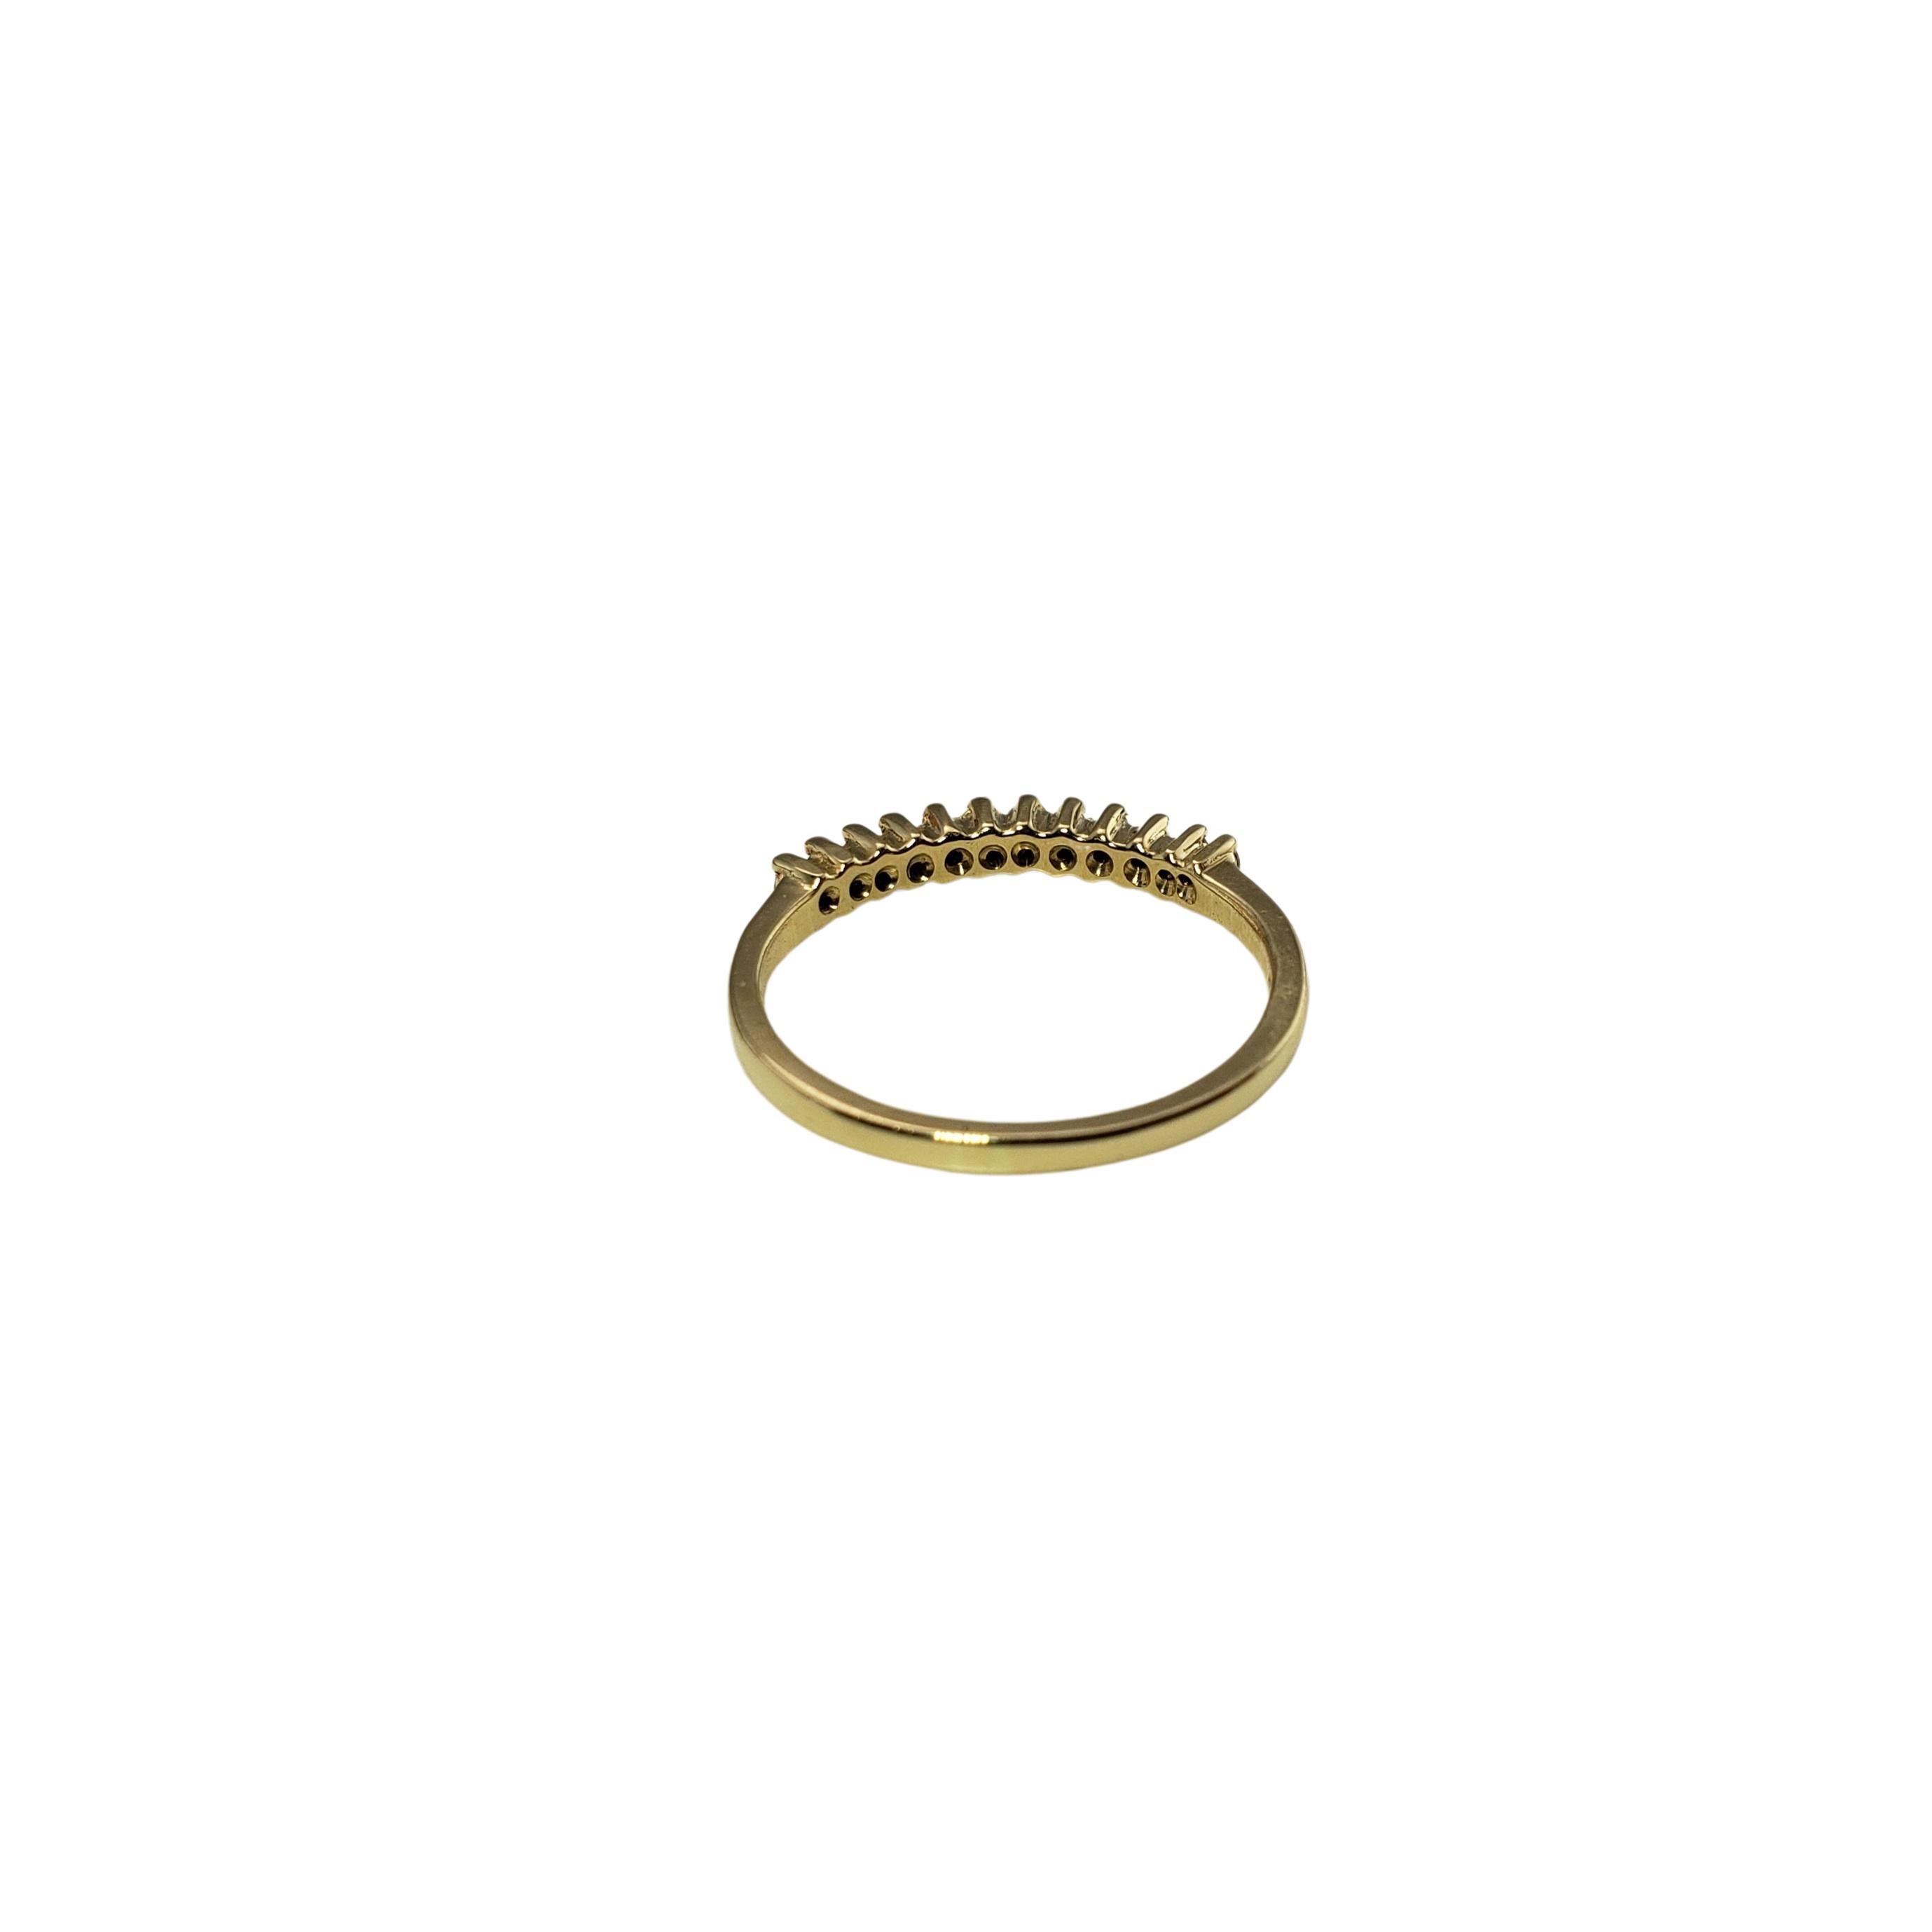 Vintage 14 Karat Yellow Gold and Diamond Band Ring Size 5.5-

This sparkling ring features 12 round brilliant cut diamonds set in classic 14K yellow gold. Width: 2 mm. Shank: 1 mm.

Approximate total diamond weight: .12 ct.

Diamond clarity: